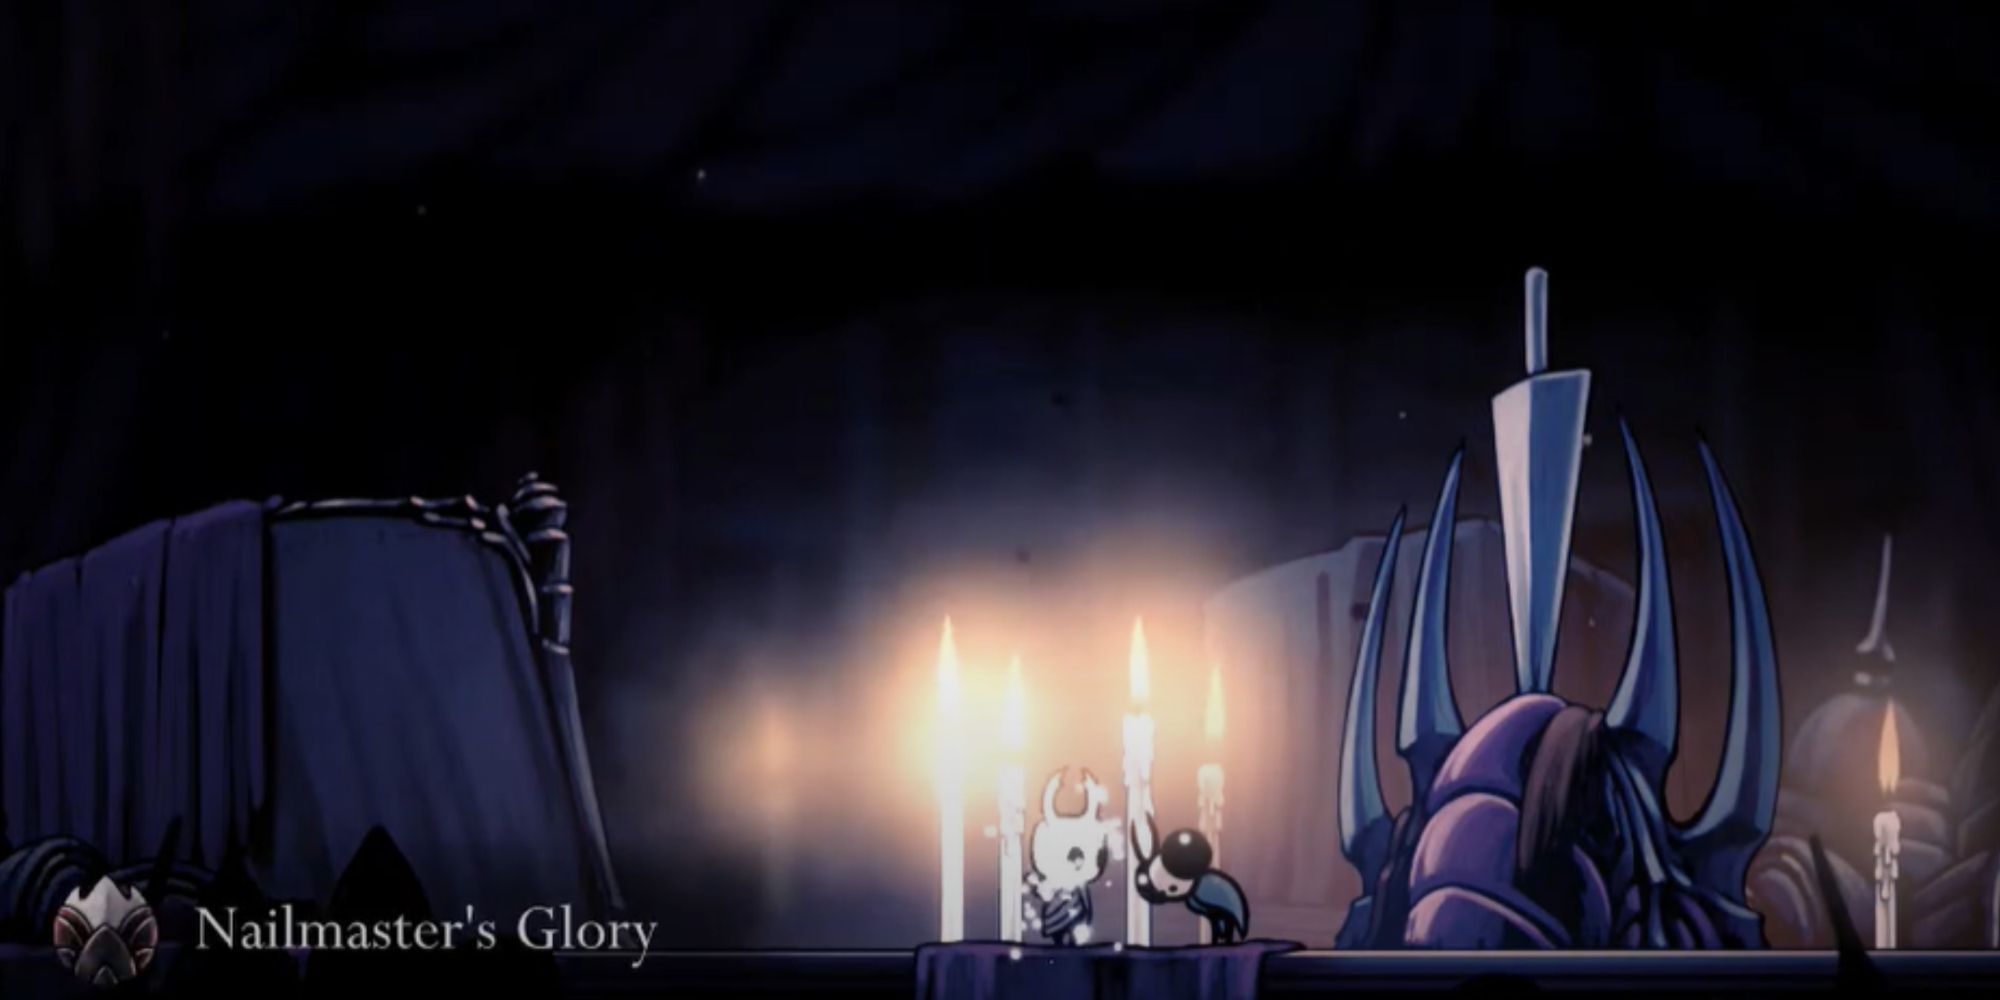 The Knight receives Nailmaster's Glory from Sly in Hollow Knight